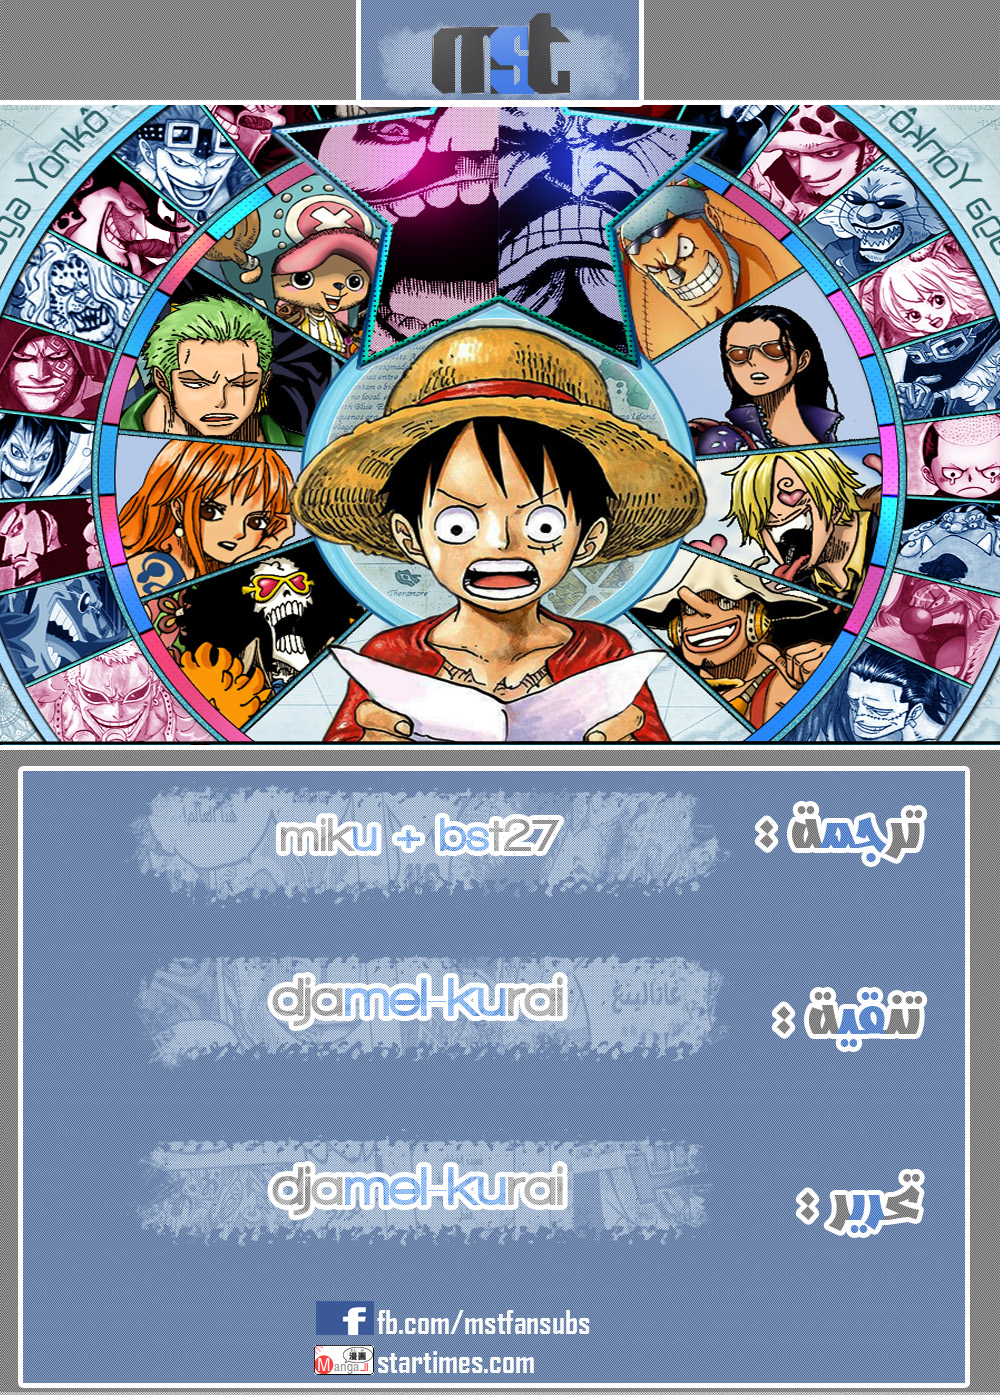 One Piece: Chapter 917 - Page 1